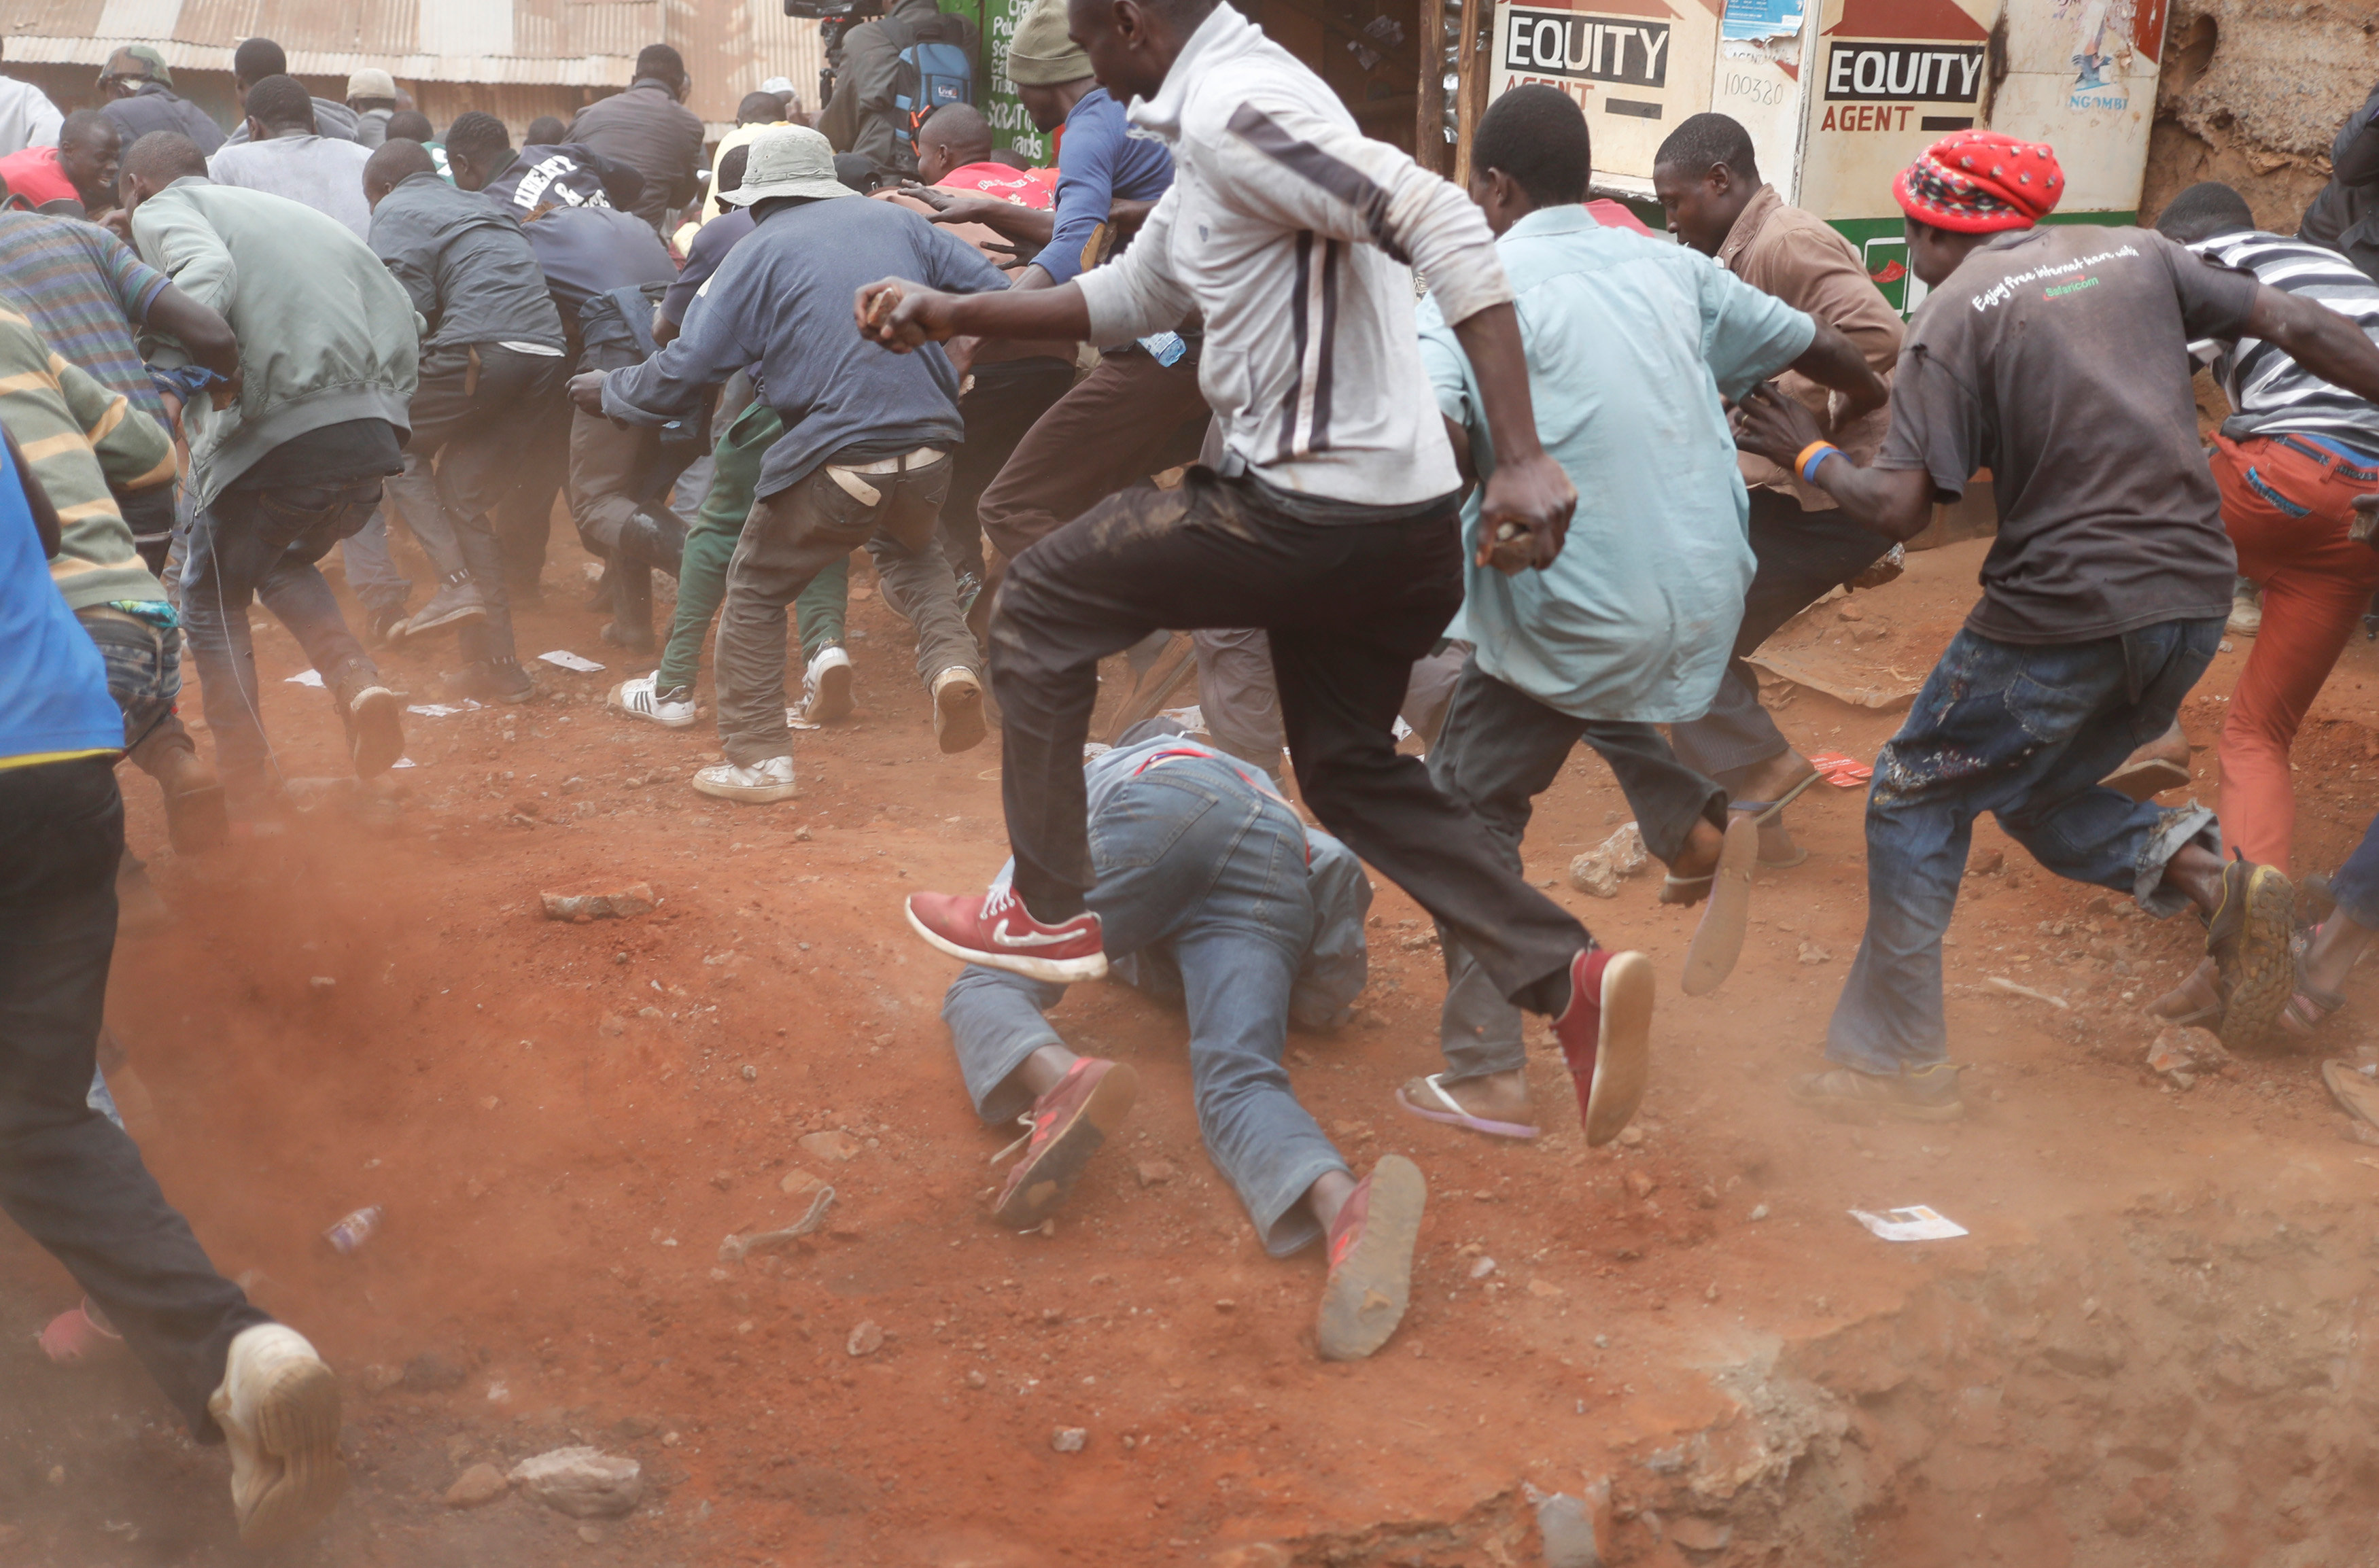 In pictures: Violence erupts in post-election Kenya